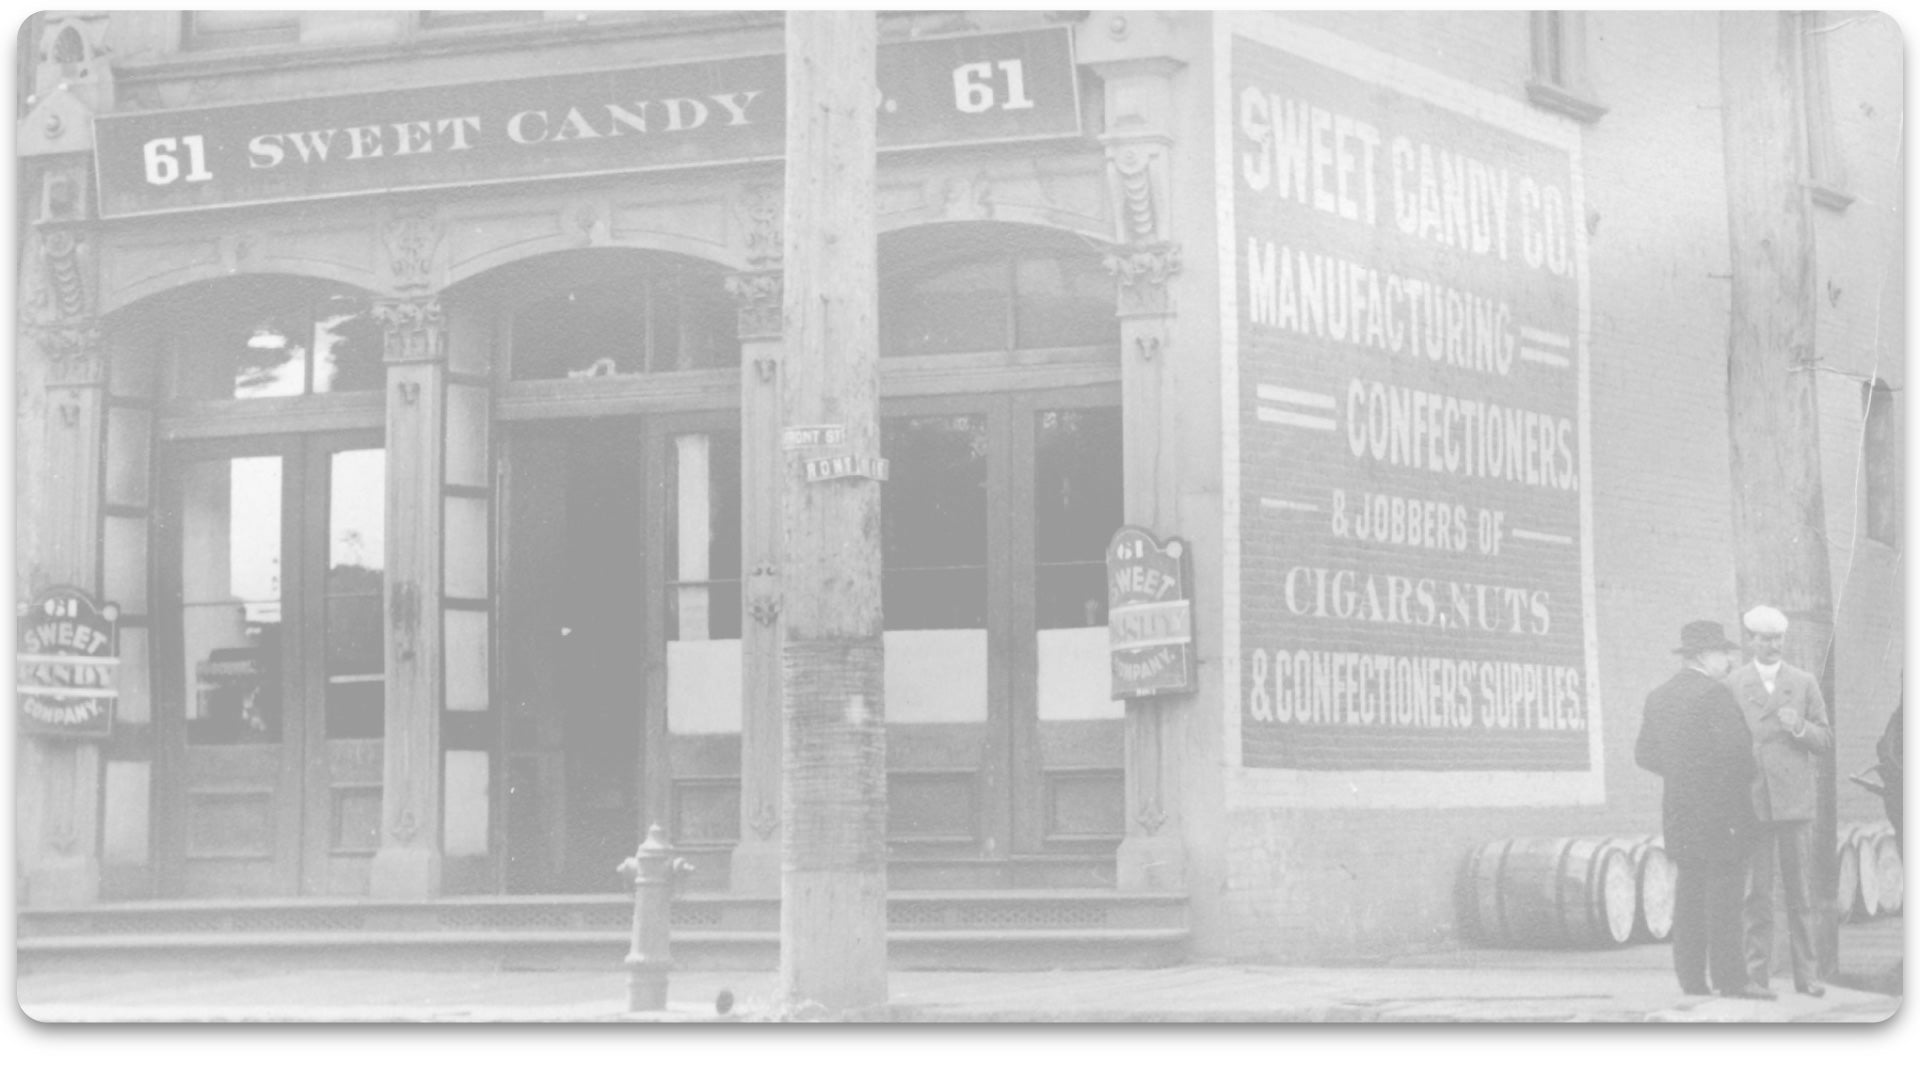 Sweet Candy Company Building in early 1900's